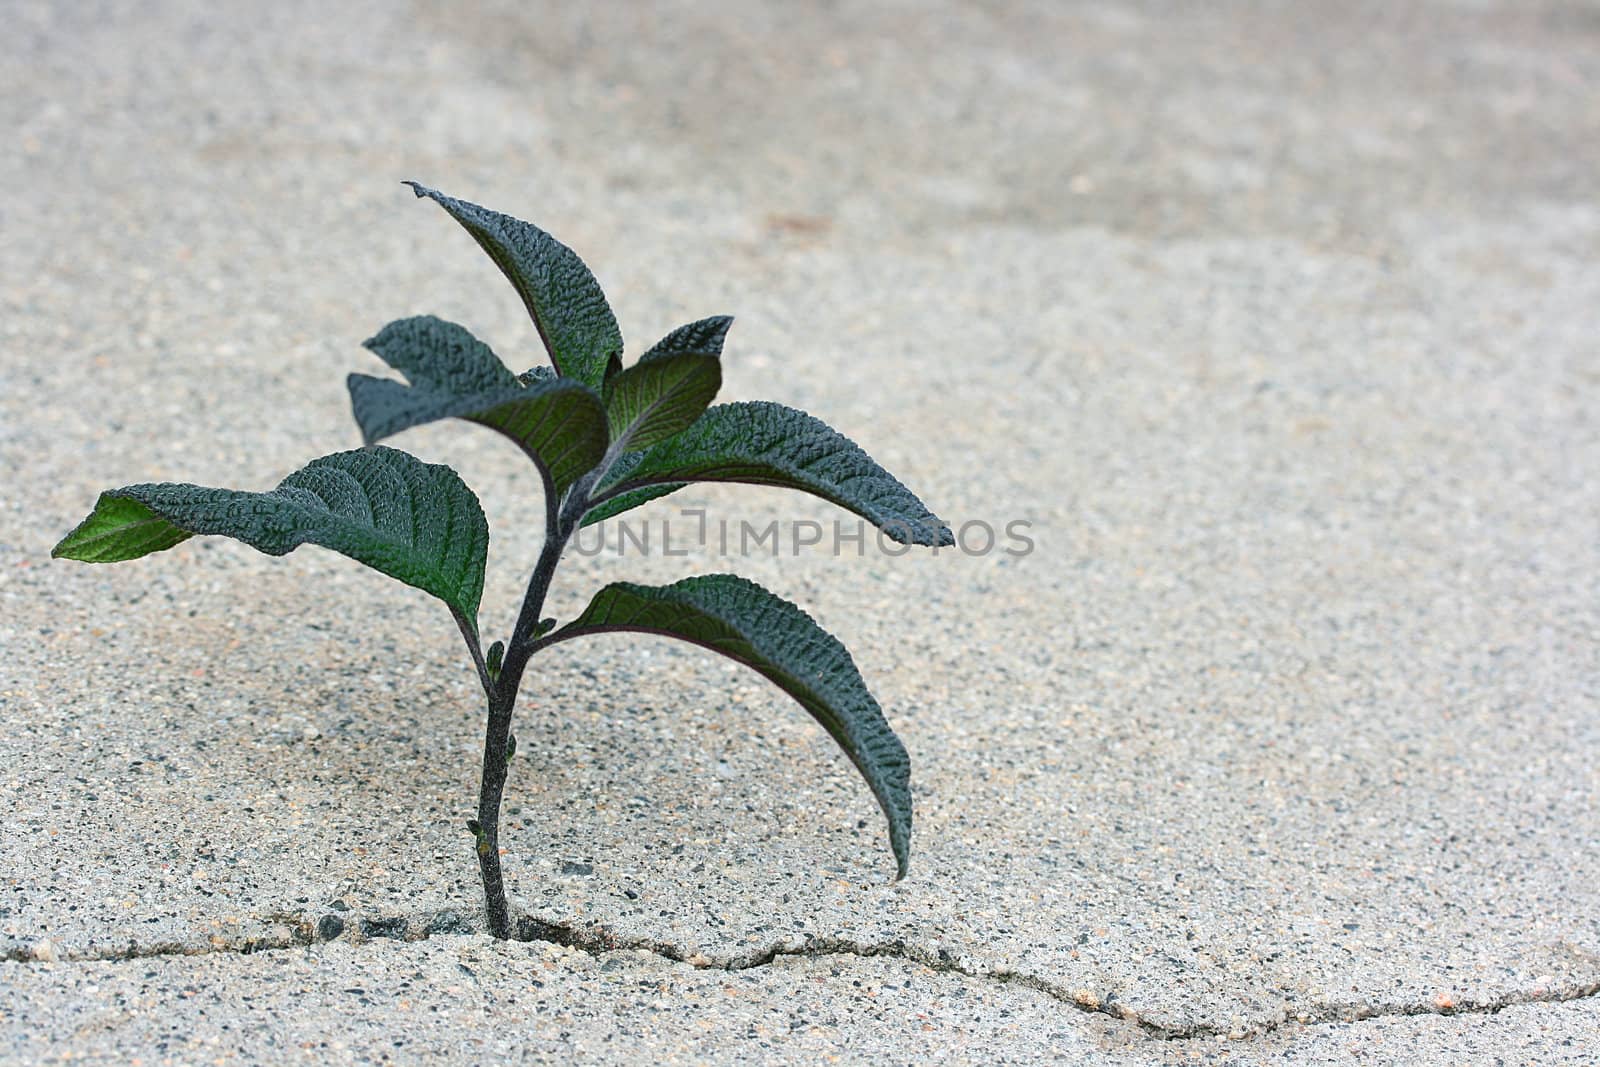 The young green plant has grown in a crack of concrete road.